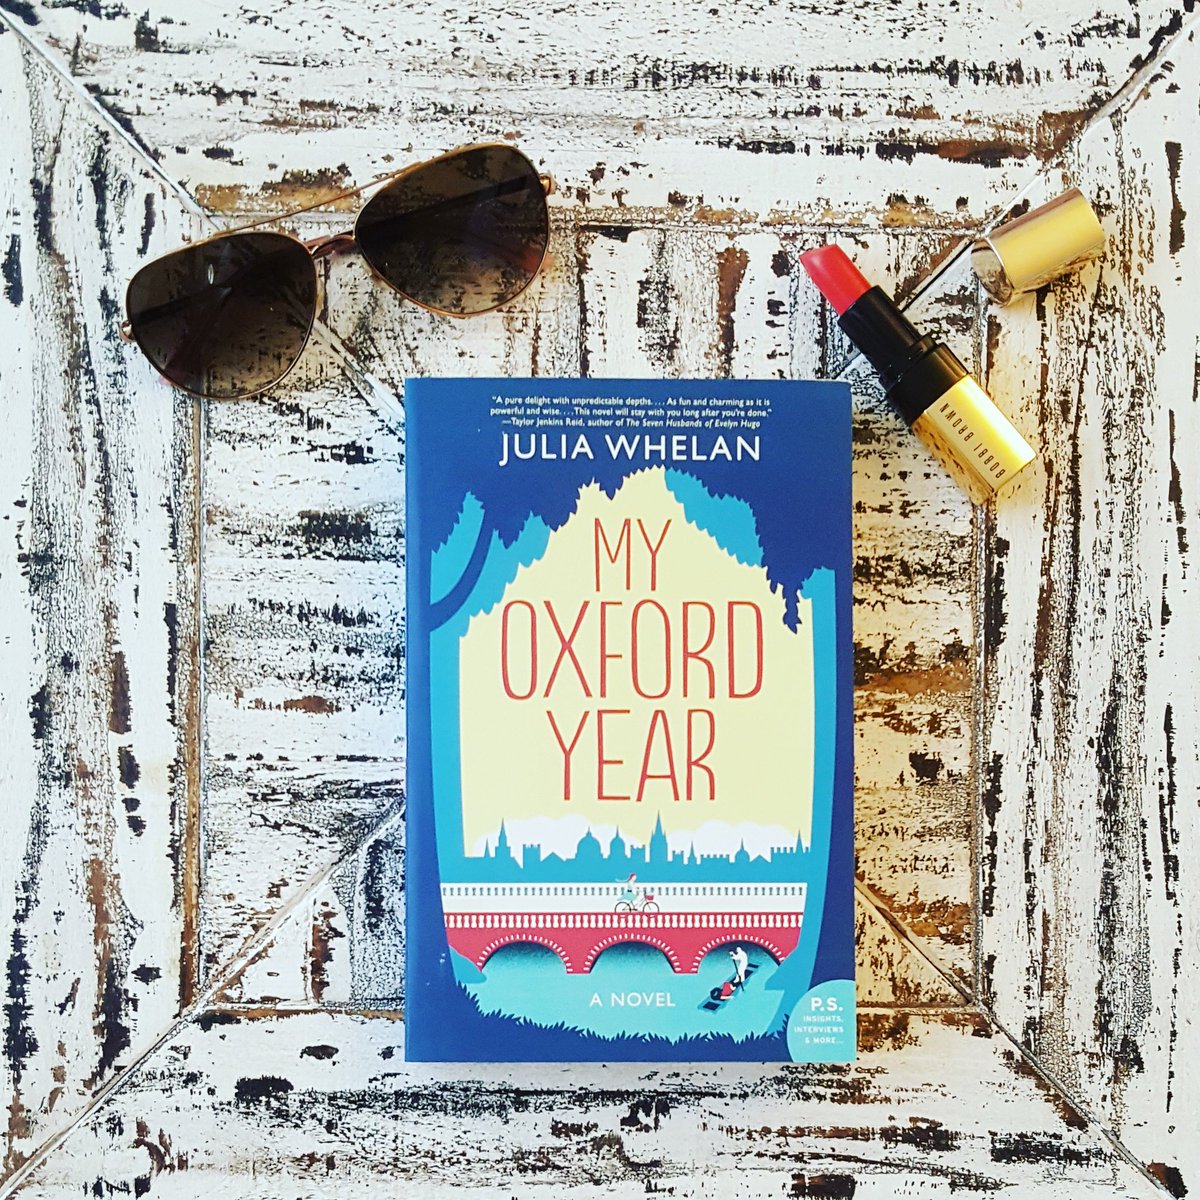 Who is Summer ready with a new coral lipstick, a good book and a favorite pair of sunnies? This girl! 
#katespade #myoxfordyear #bobbibrown #giveawaywinner #bookstagram #bookandlipstick